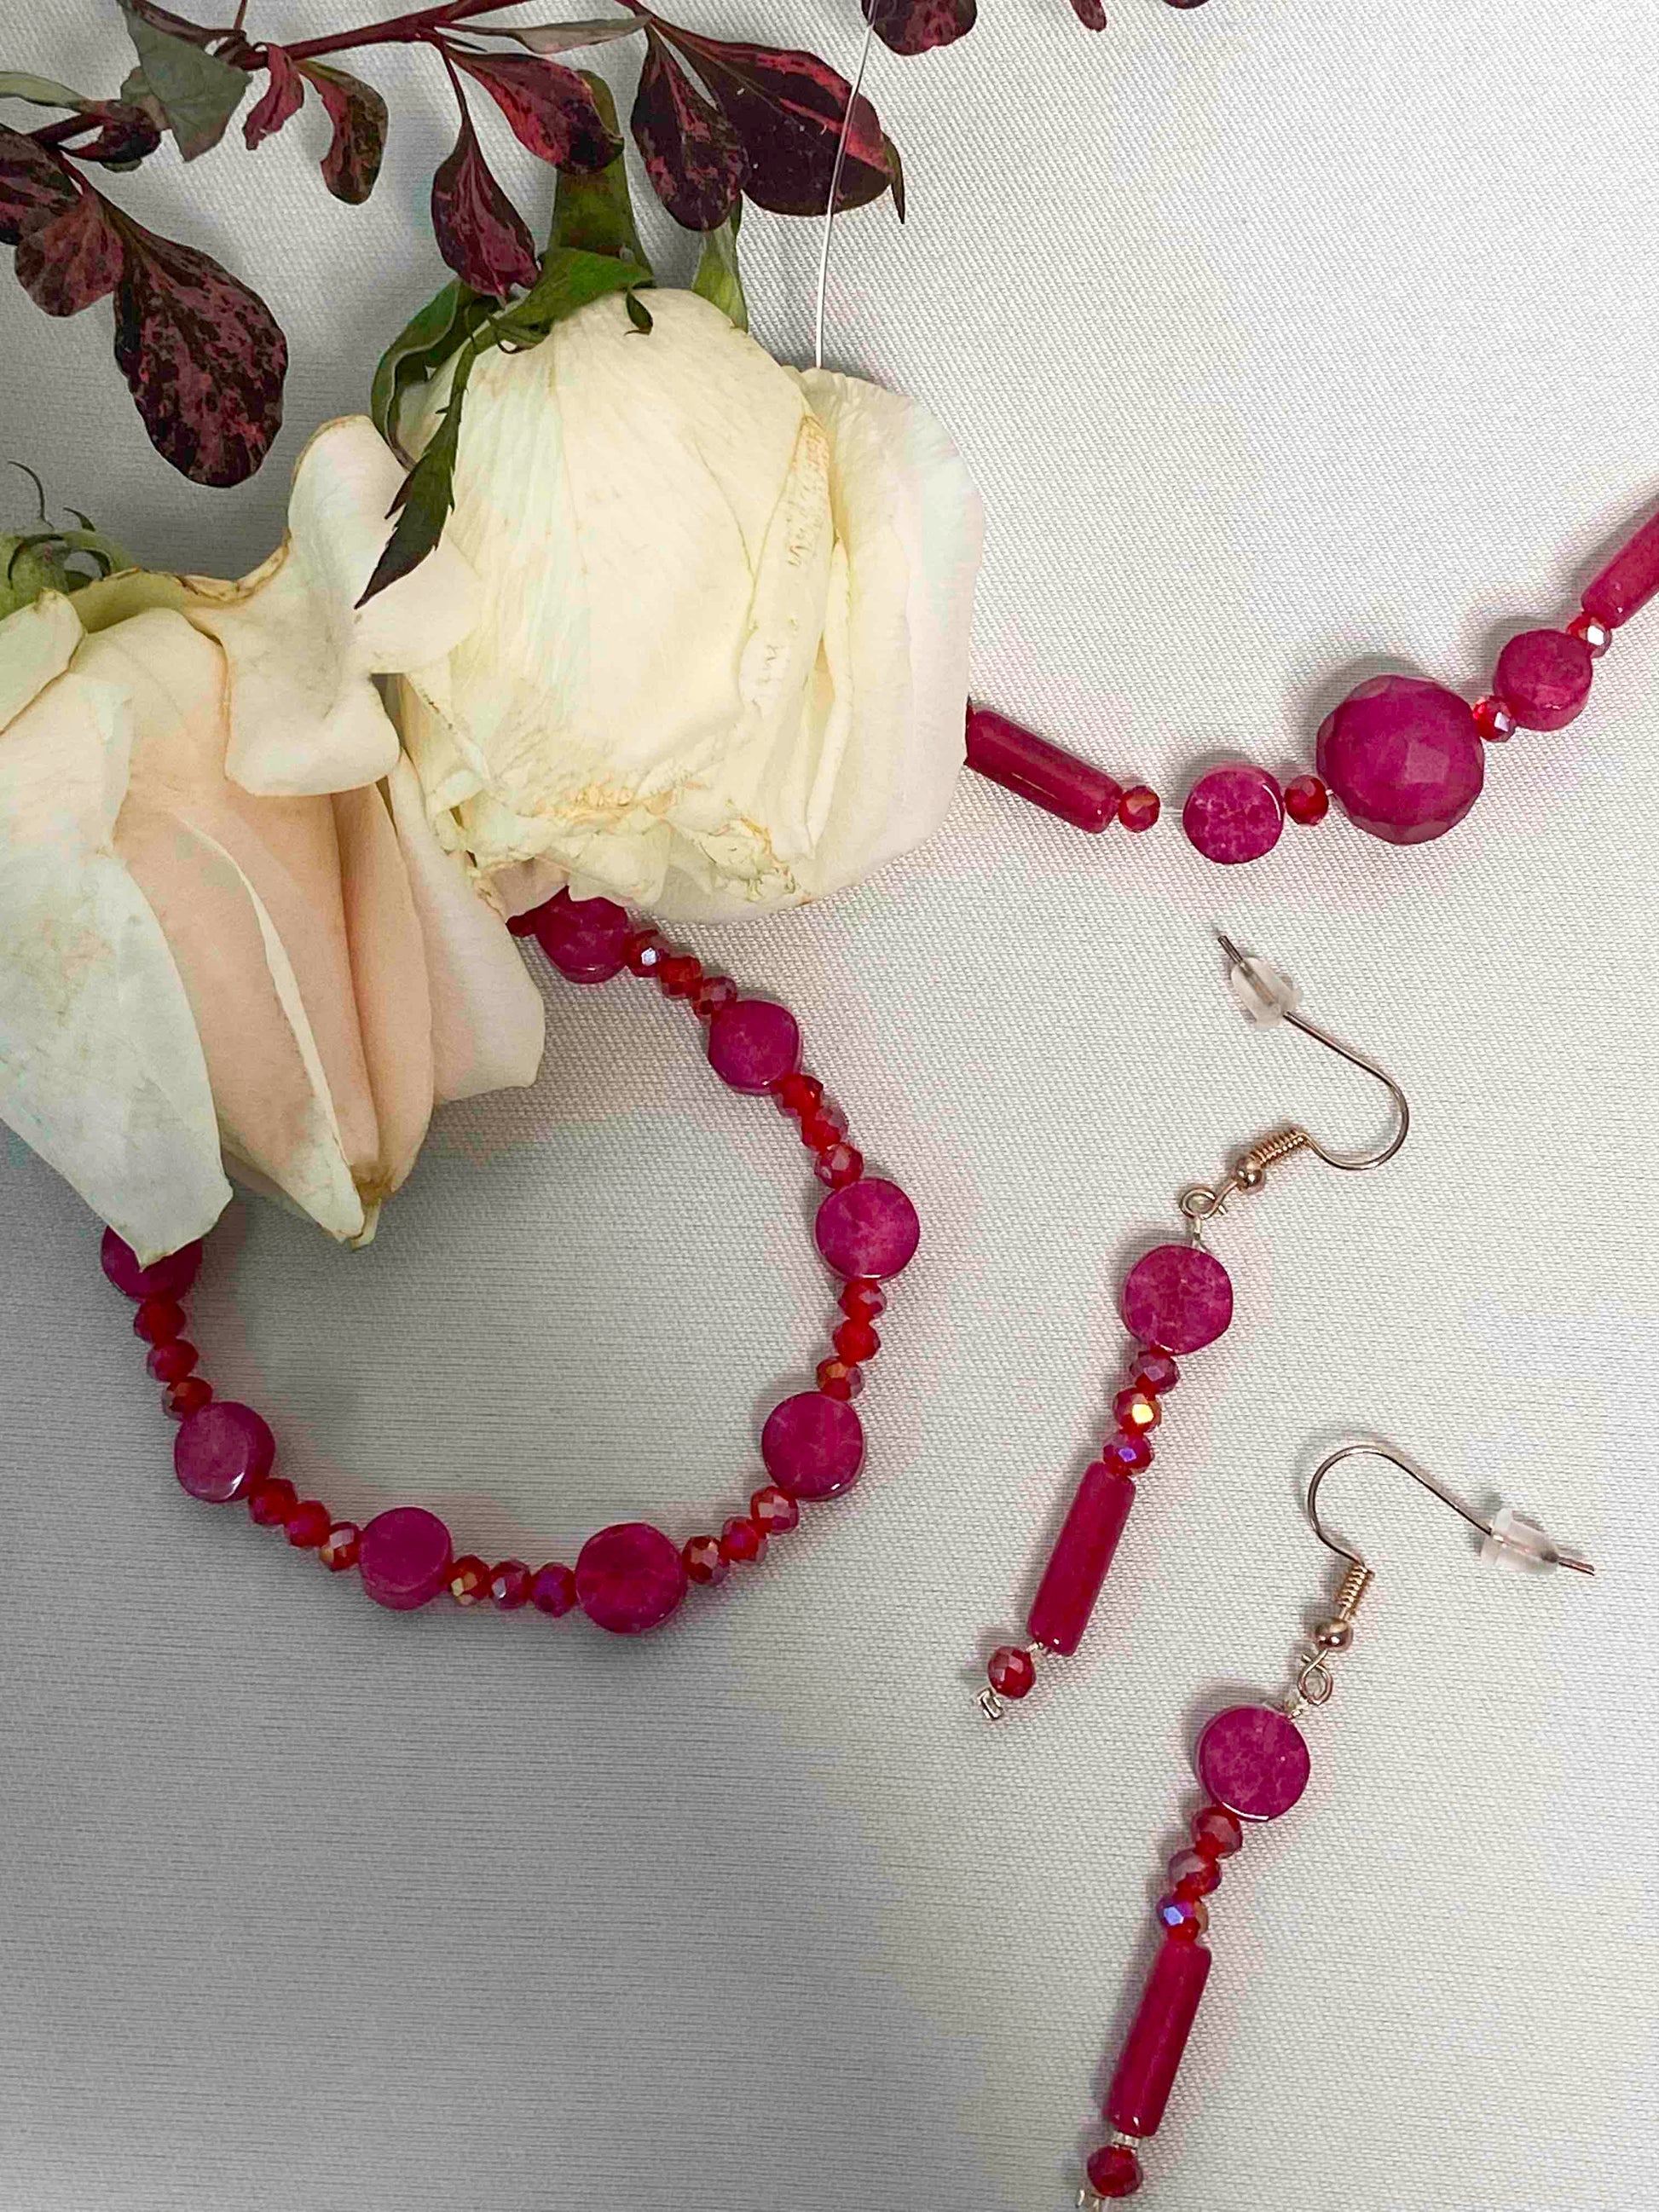 A set of handmade red crystal bead and pink rubellite stone bracelet, pendant necklace, and dangle drop earrings.